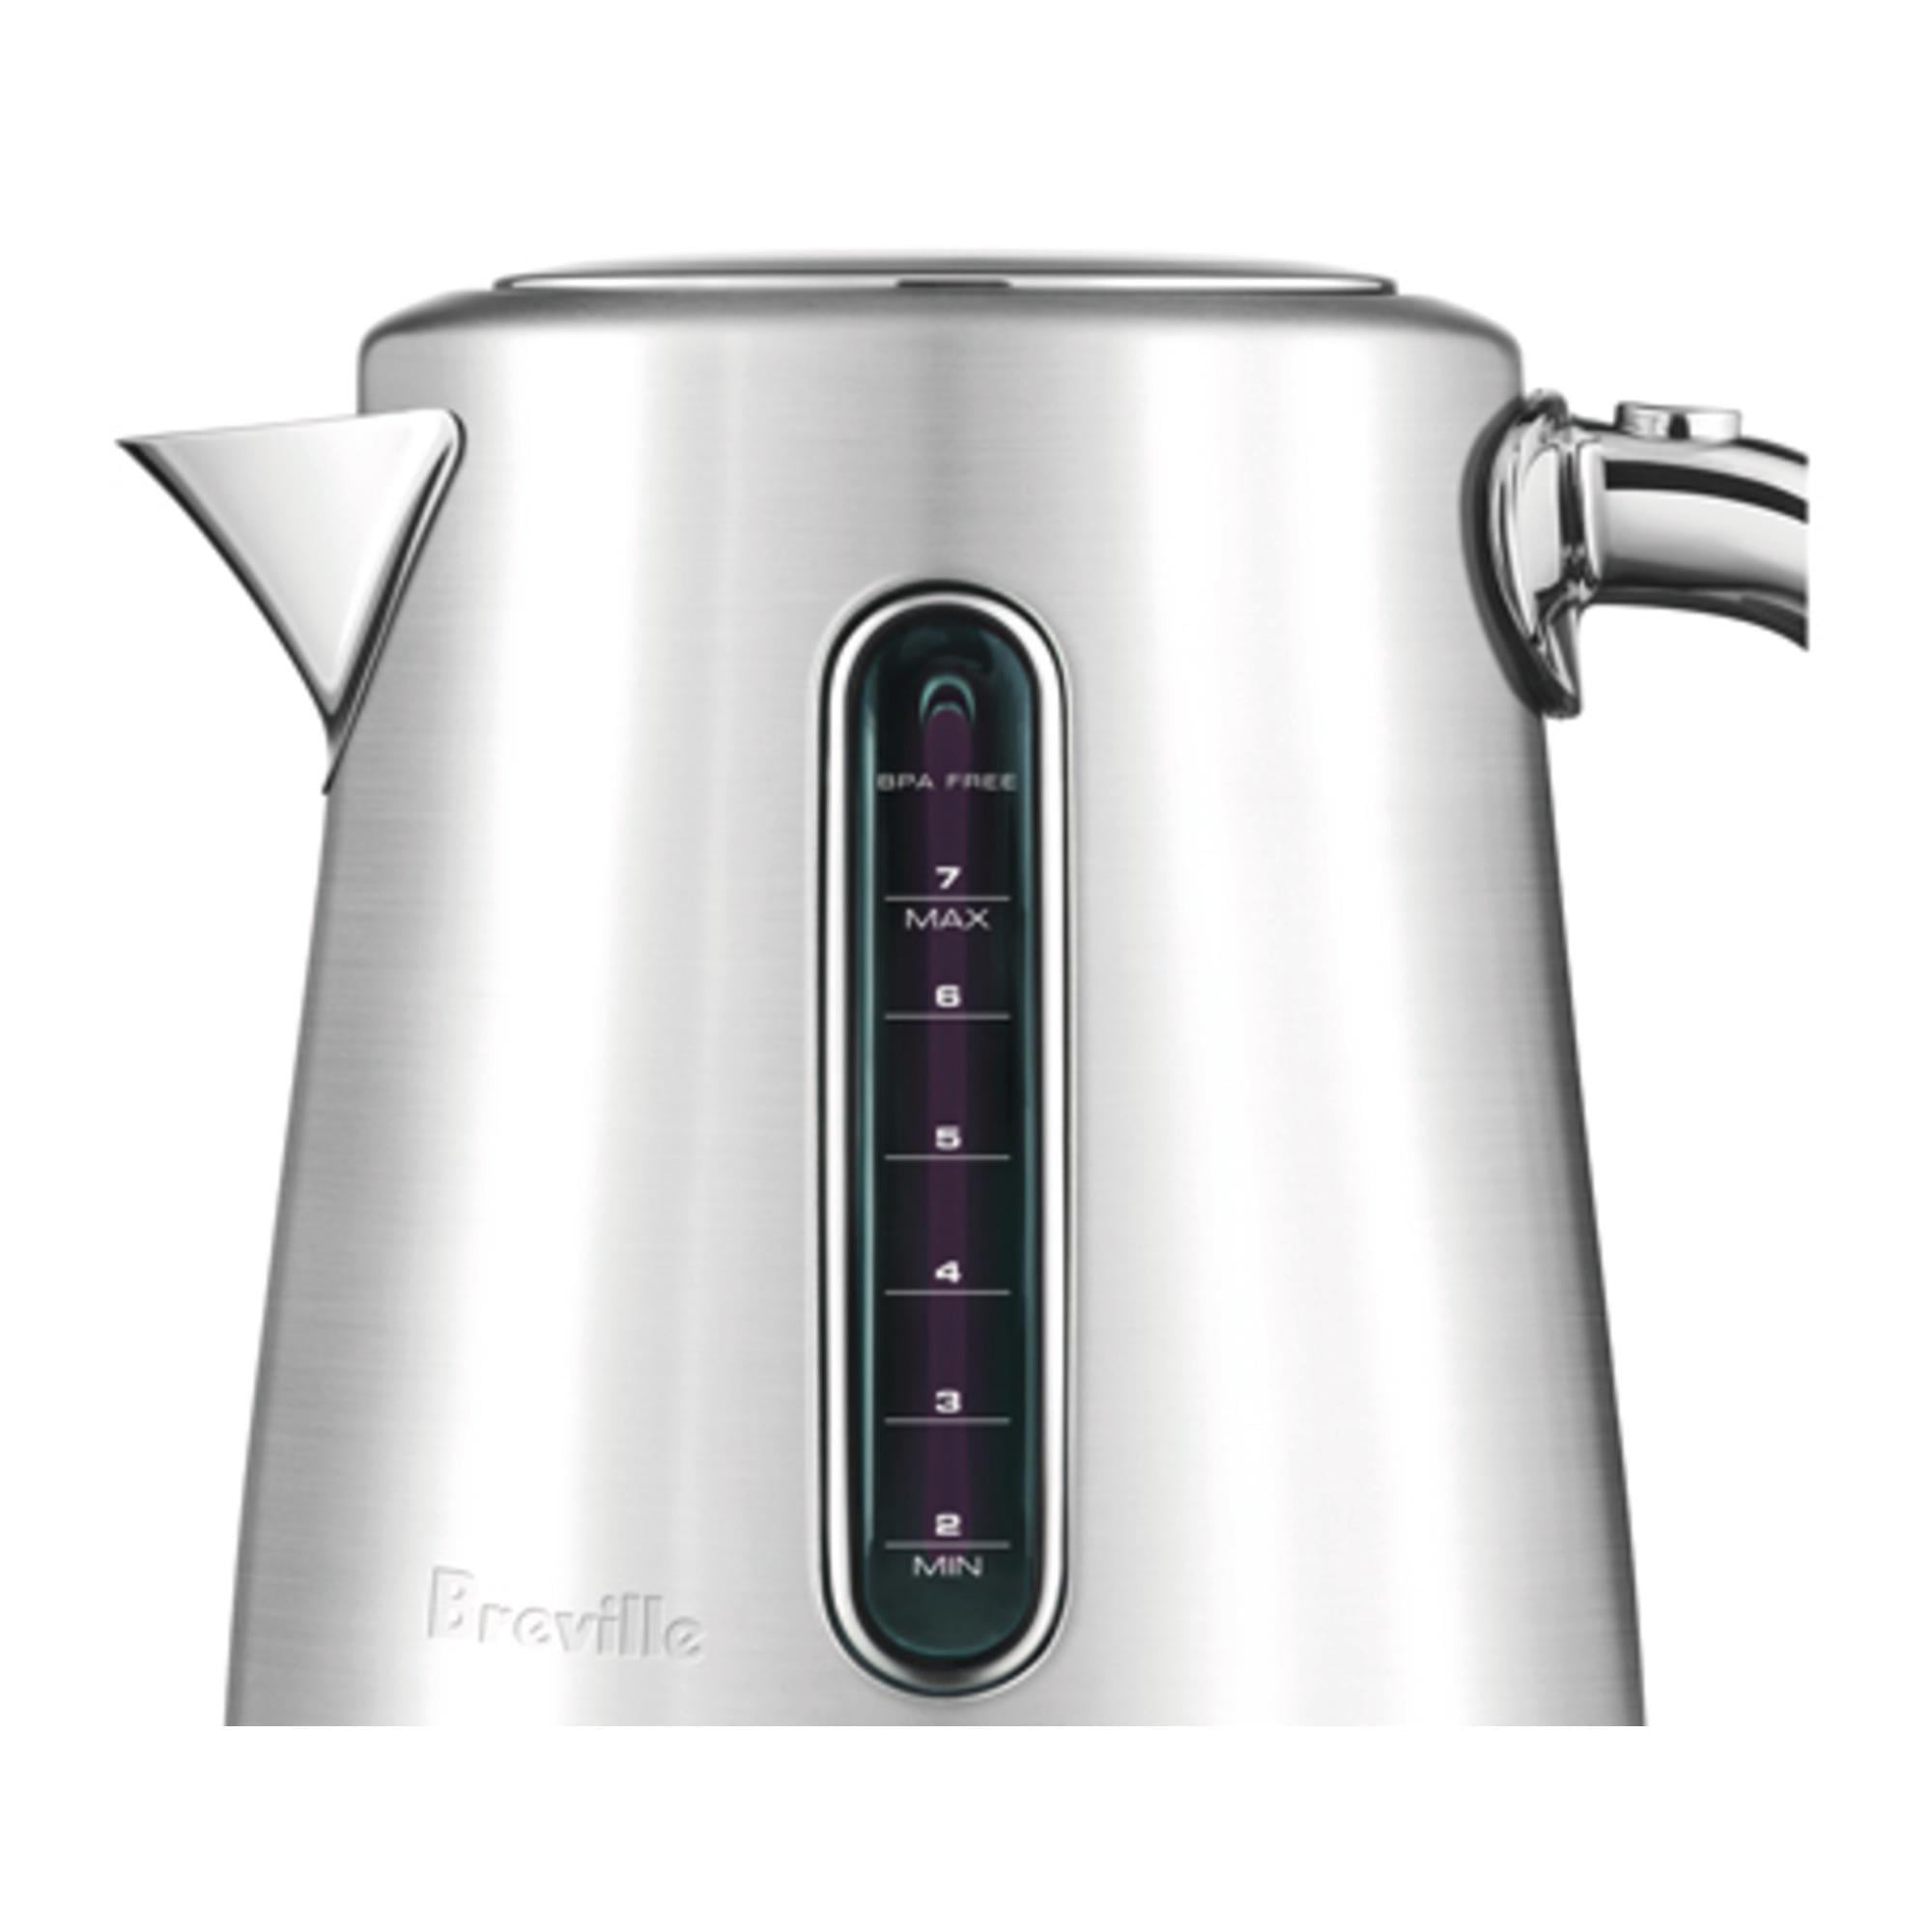 the Smart Kettle™ Luxe